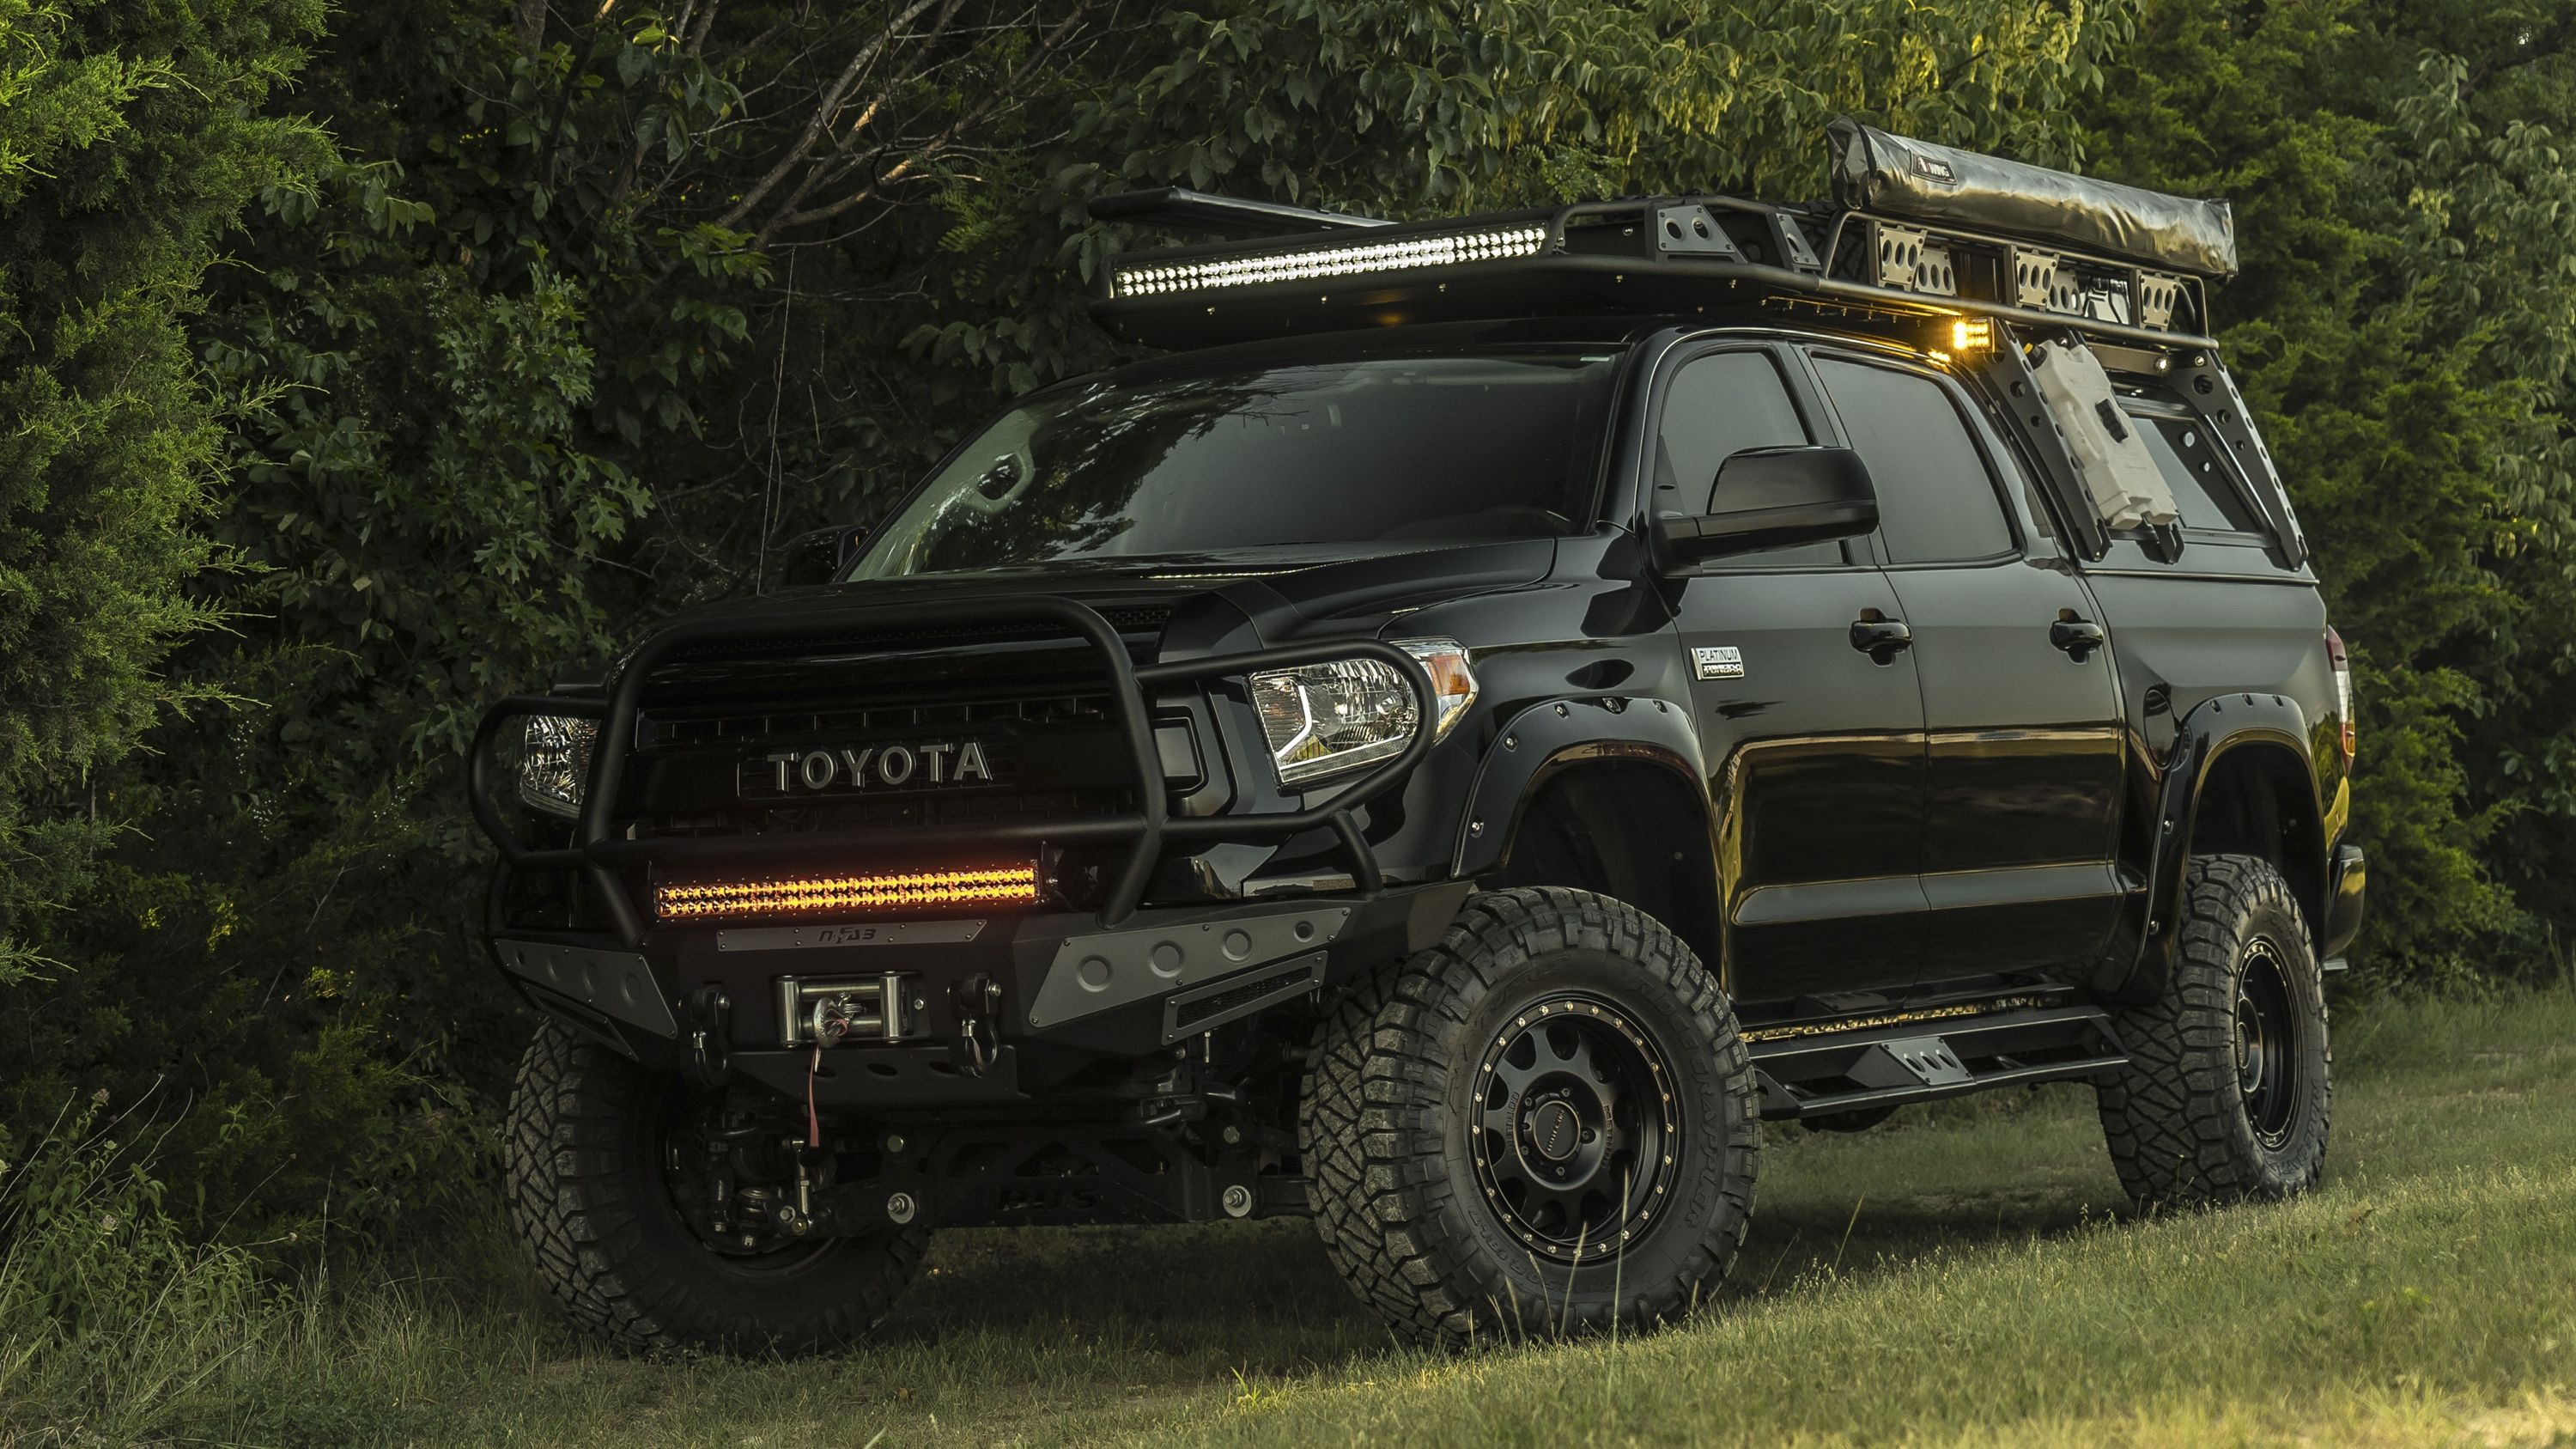 2018 Toyota Tundra for Kevin Costner by Working Complete Customs